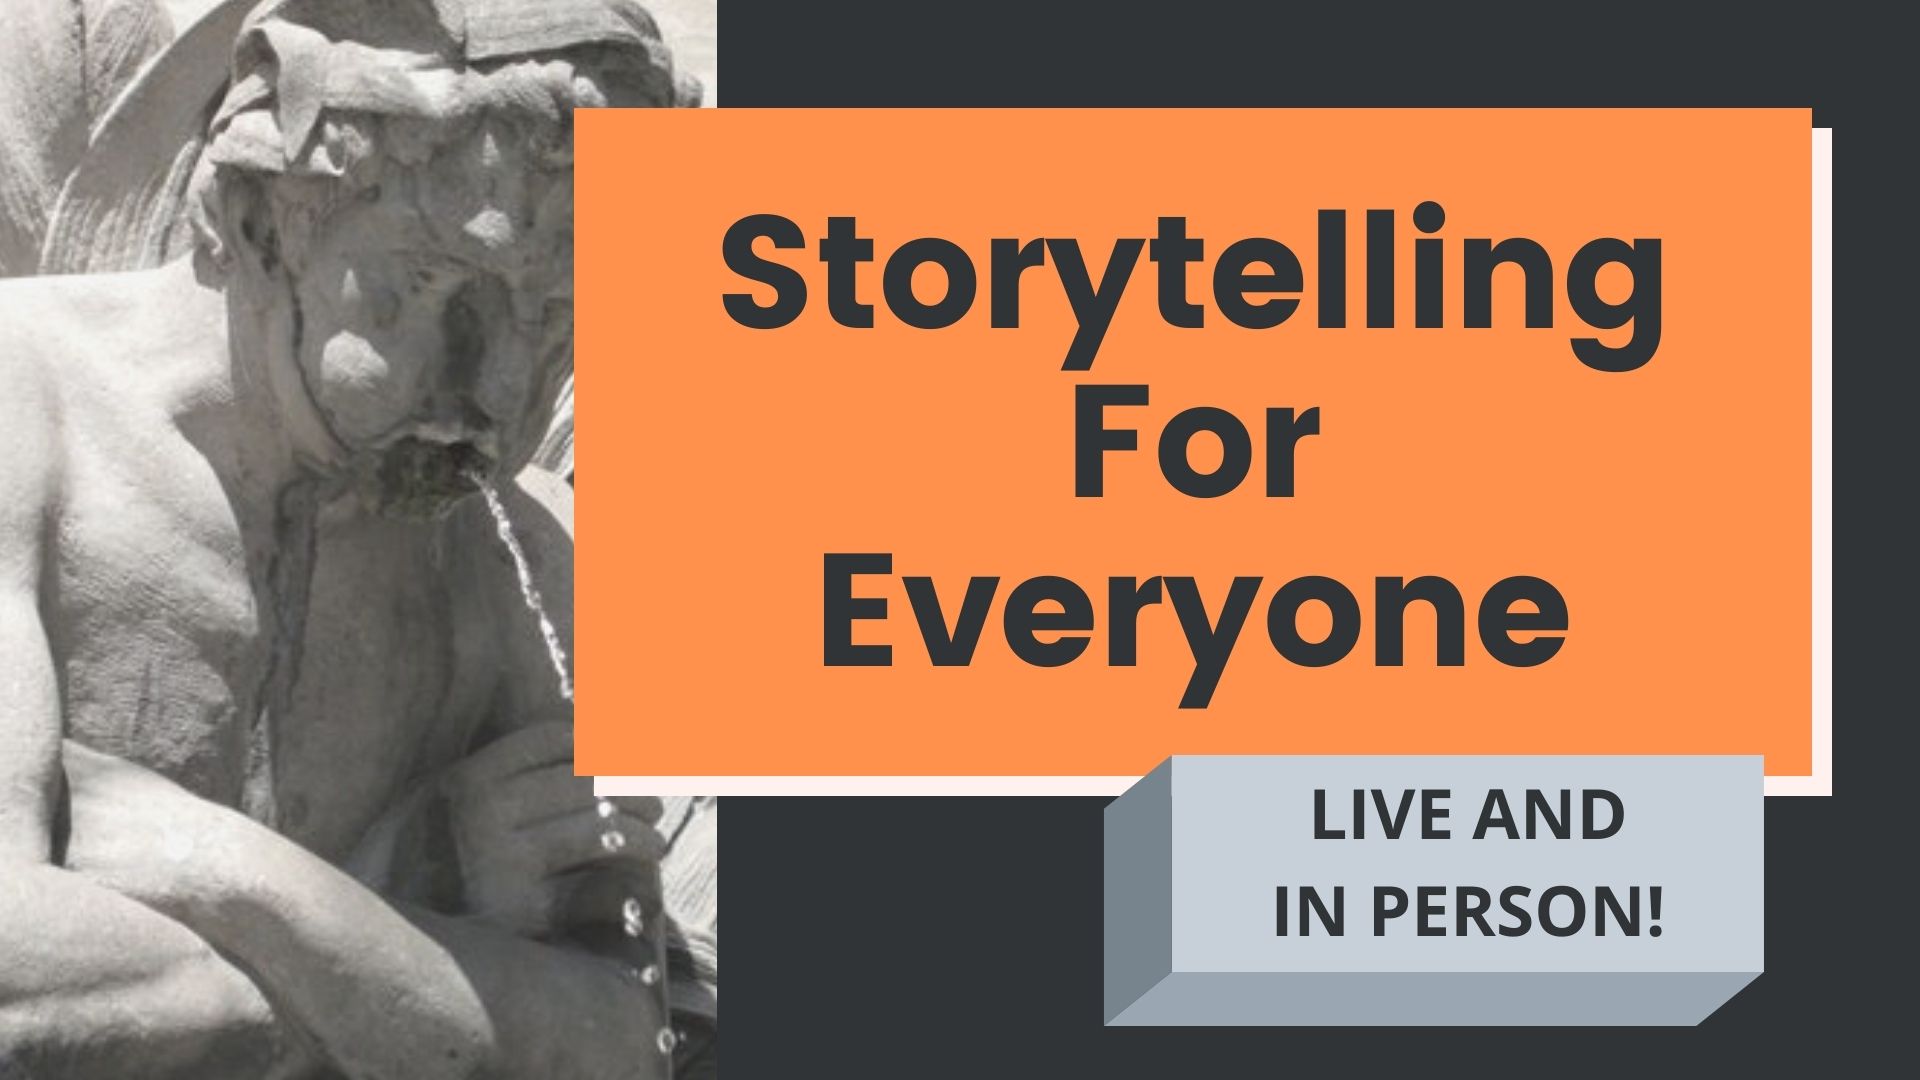 Storytelling For Everyone: Four Week Course in Personal Narrative (Mondays in January)